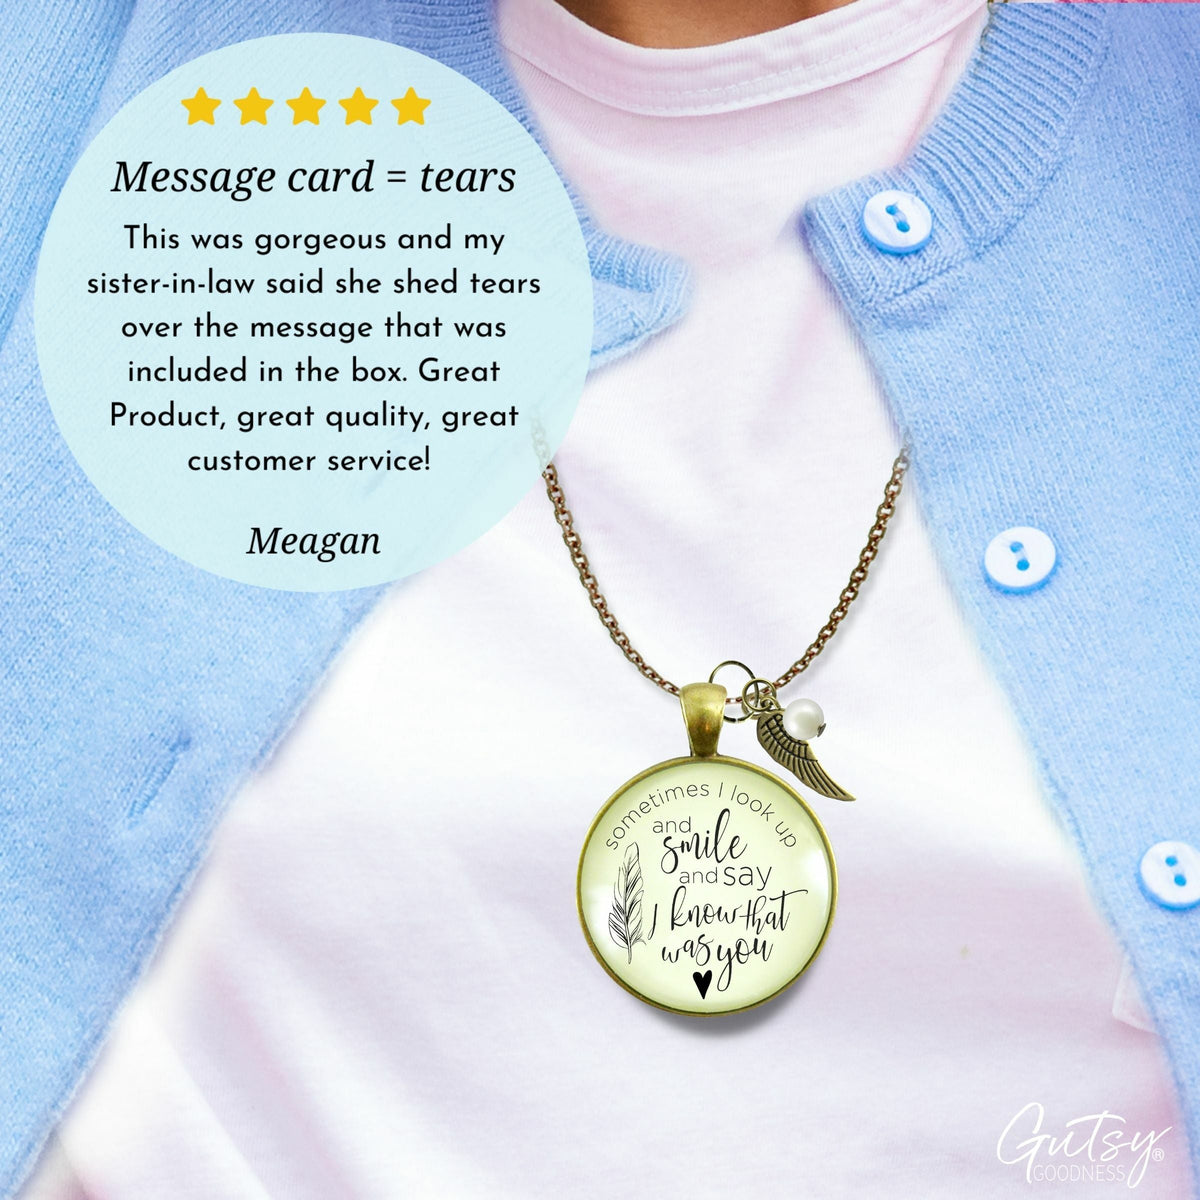 Gutsy Goodness Memorial Necklace Sometimes Times I Look Up Miss You Remembrance Gift - Gutsy Goodness Handmade Jewelry;Memorial Necklace Sometimes Times I Look Up Miss You Remembrance Gift - Gutsy Goodness Handmade Jewelry Gifts